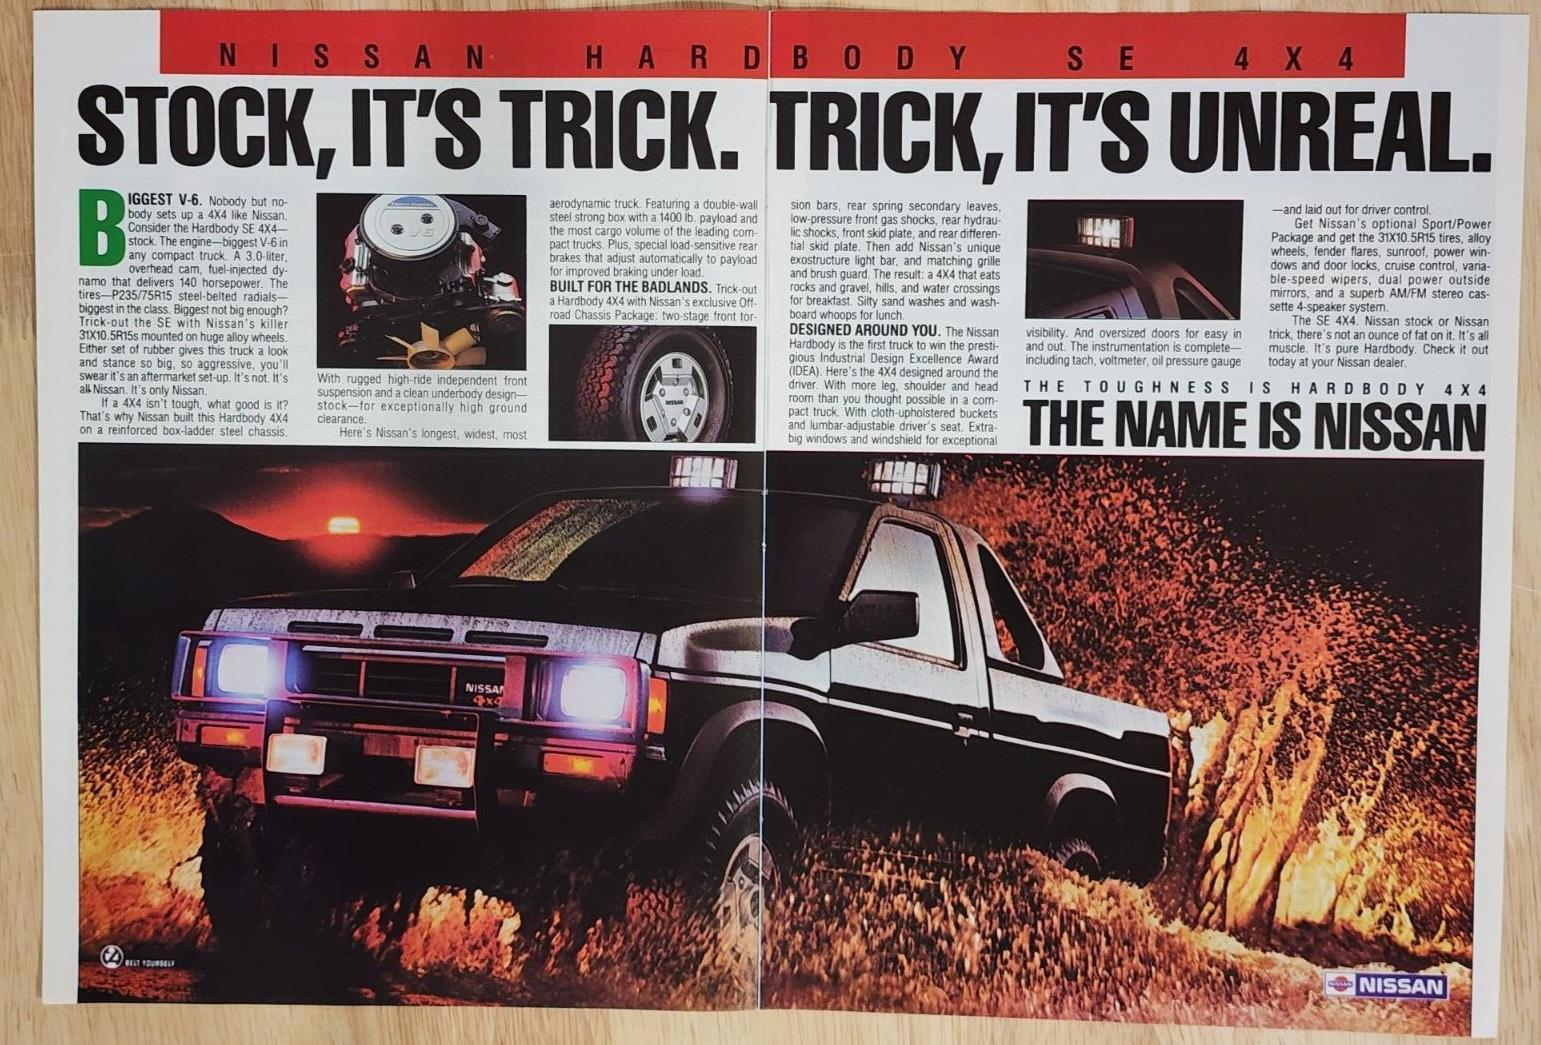 The Name Is Nissan 4x4 SE Hardbody Truck 2-page Vintage Print Ad Stock Its Trick